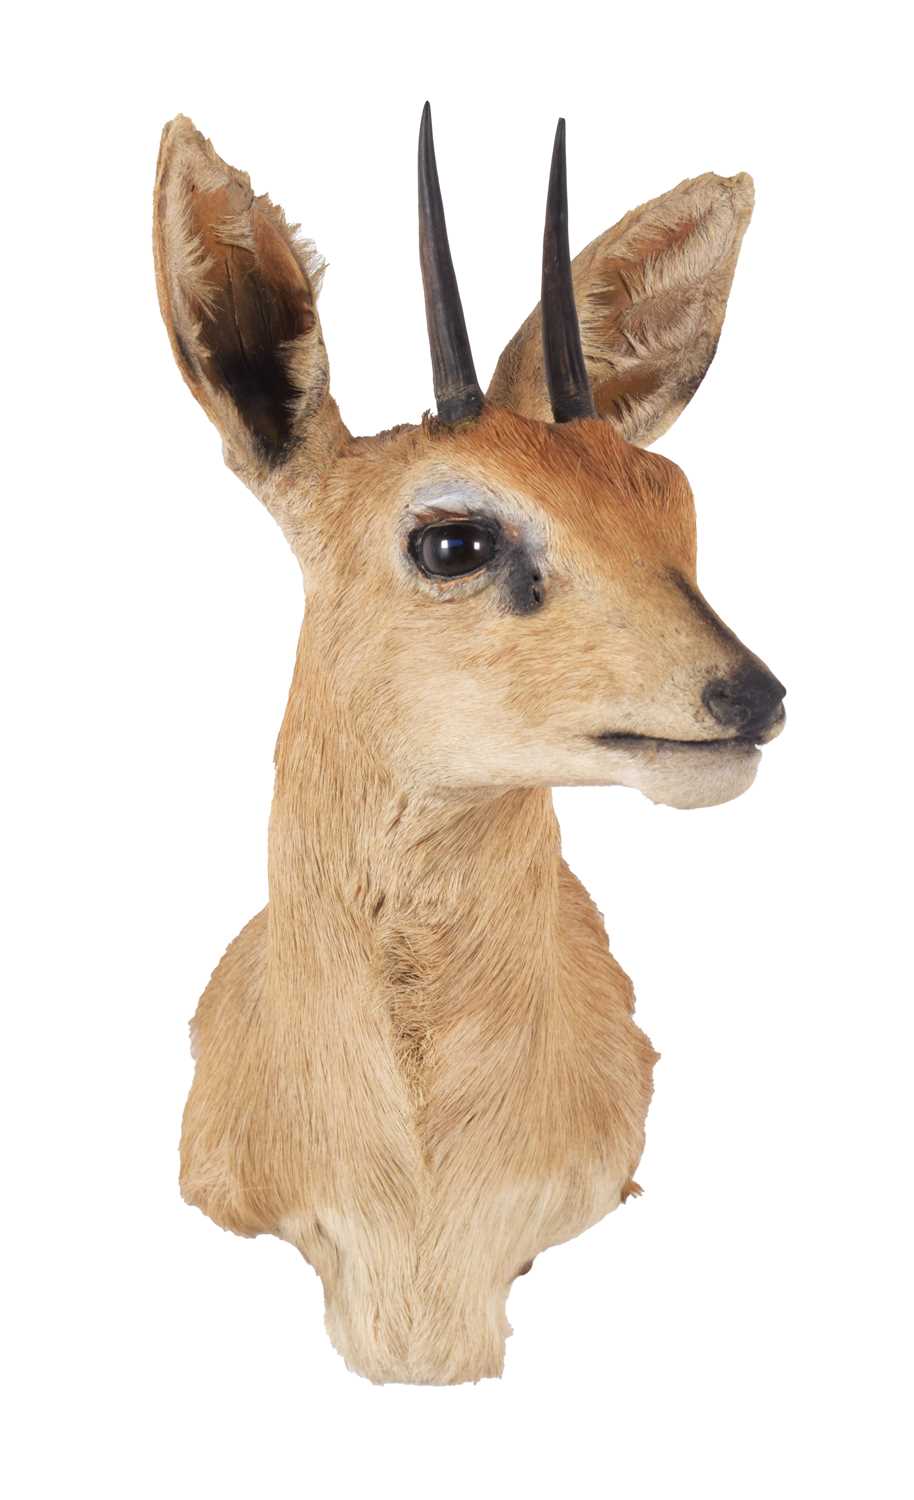 Taxidermy: South African Steenbok (Raphicerus campestris campestris), 21st century, South Africa, - Image 3 of 3